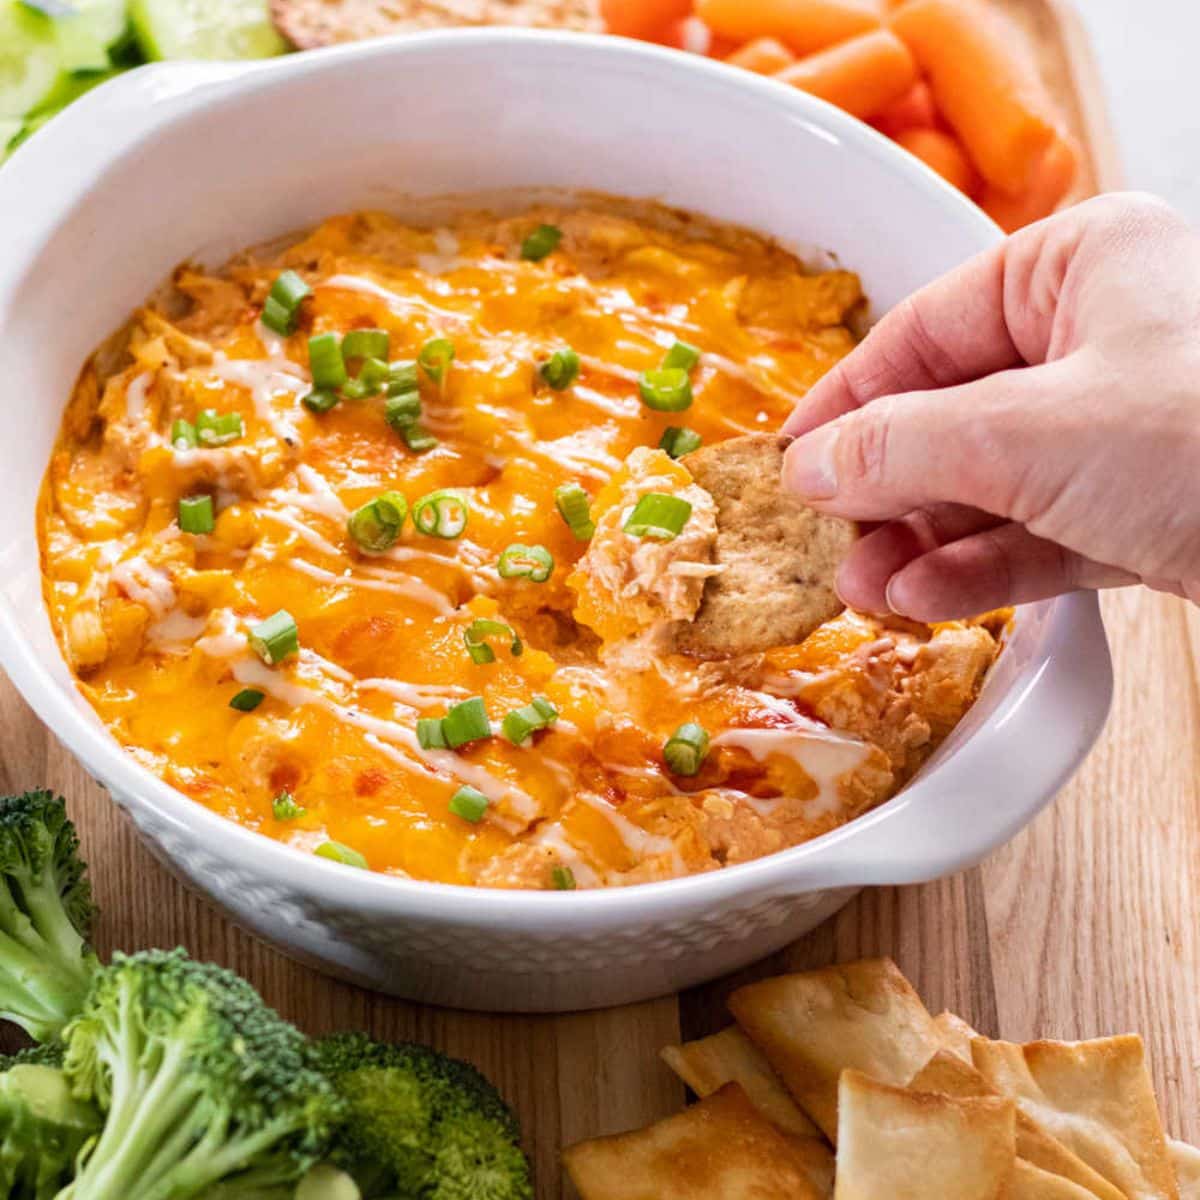 Healthy Buffalo Chicken Dip made low calorie, higher in protein and balanced in nutrition. This delicious appetizer is a crowd favorite!